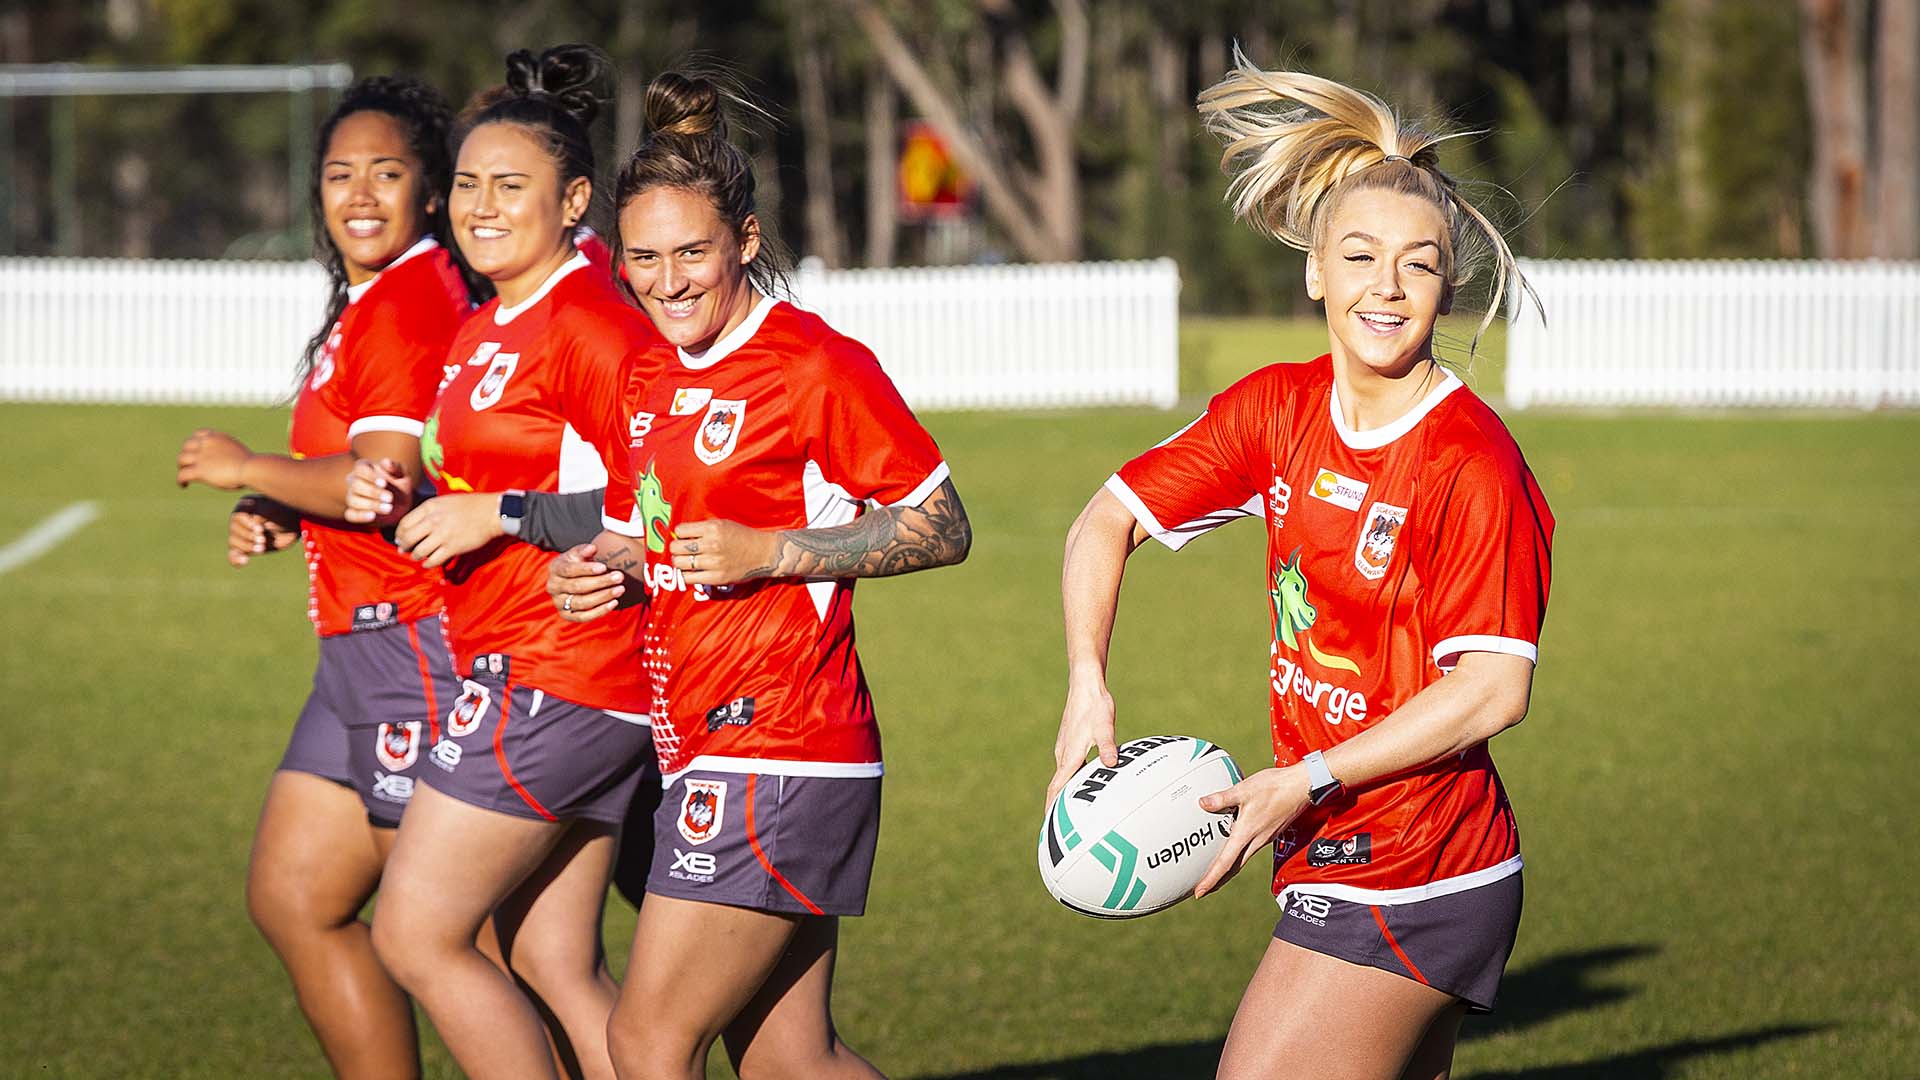 Players from the St George Illawarra Dragons women's team training on one of UOW's ovals.